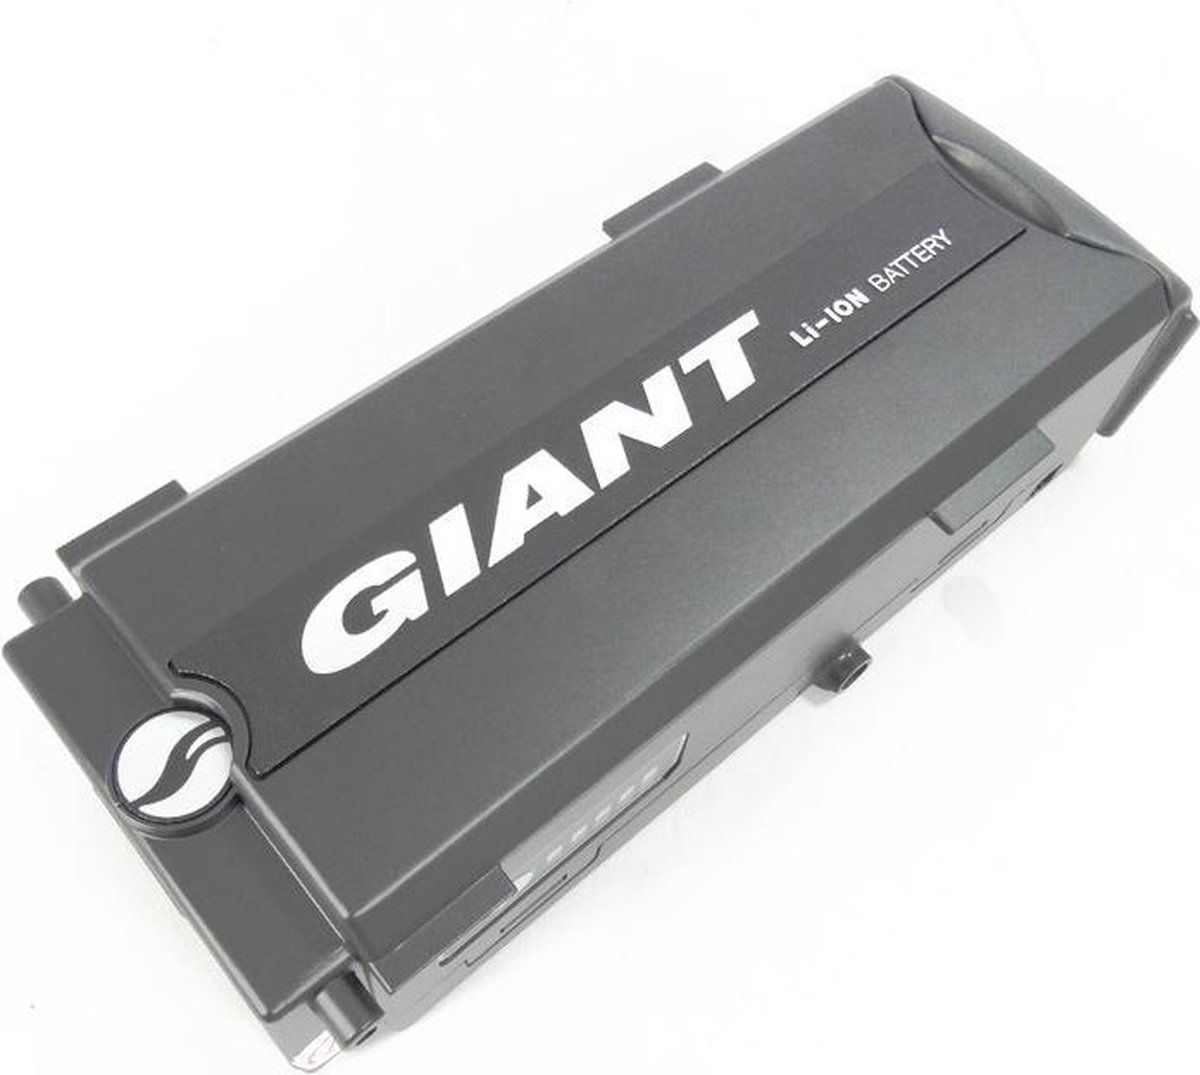 Giant Twist and Ease Fietsaccu - 409Wh - Bagagedrager | bol.com